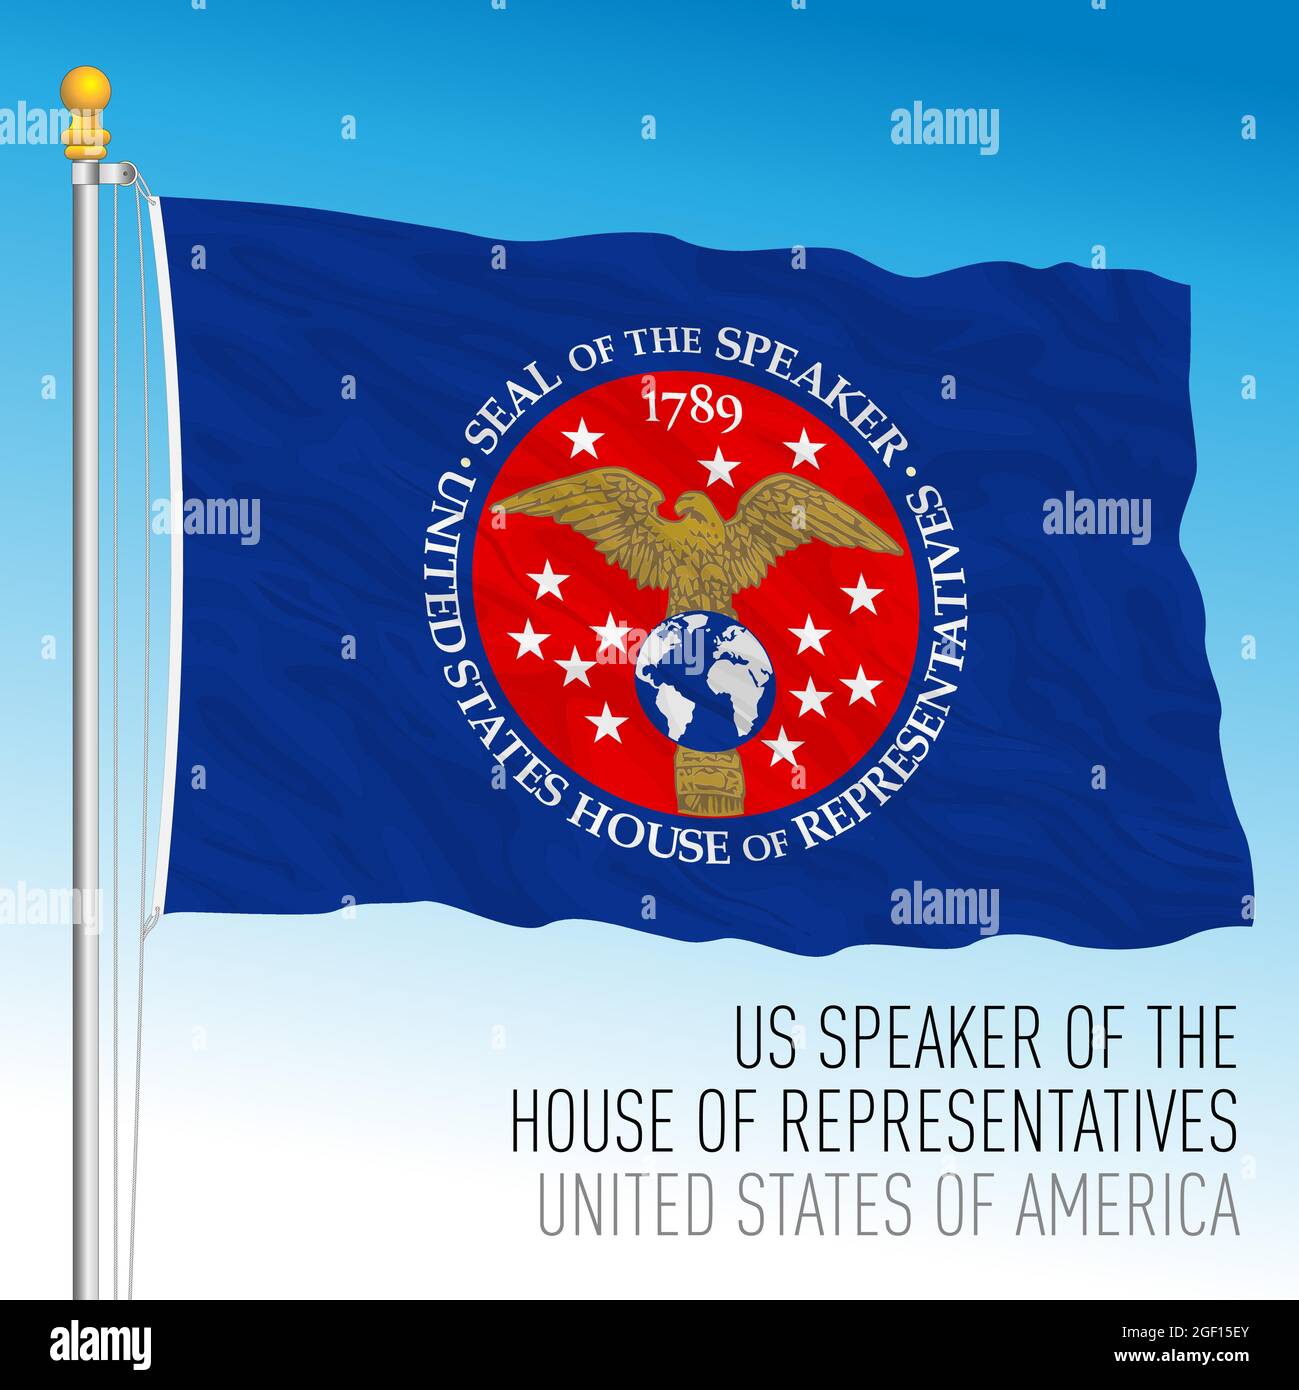 US Speaker of the House of the Representatives flag, United States of America, vector illustration Stock Vector